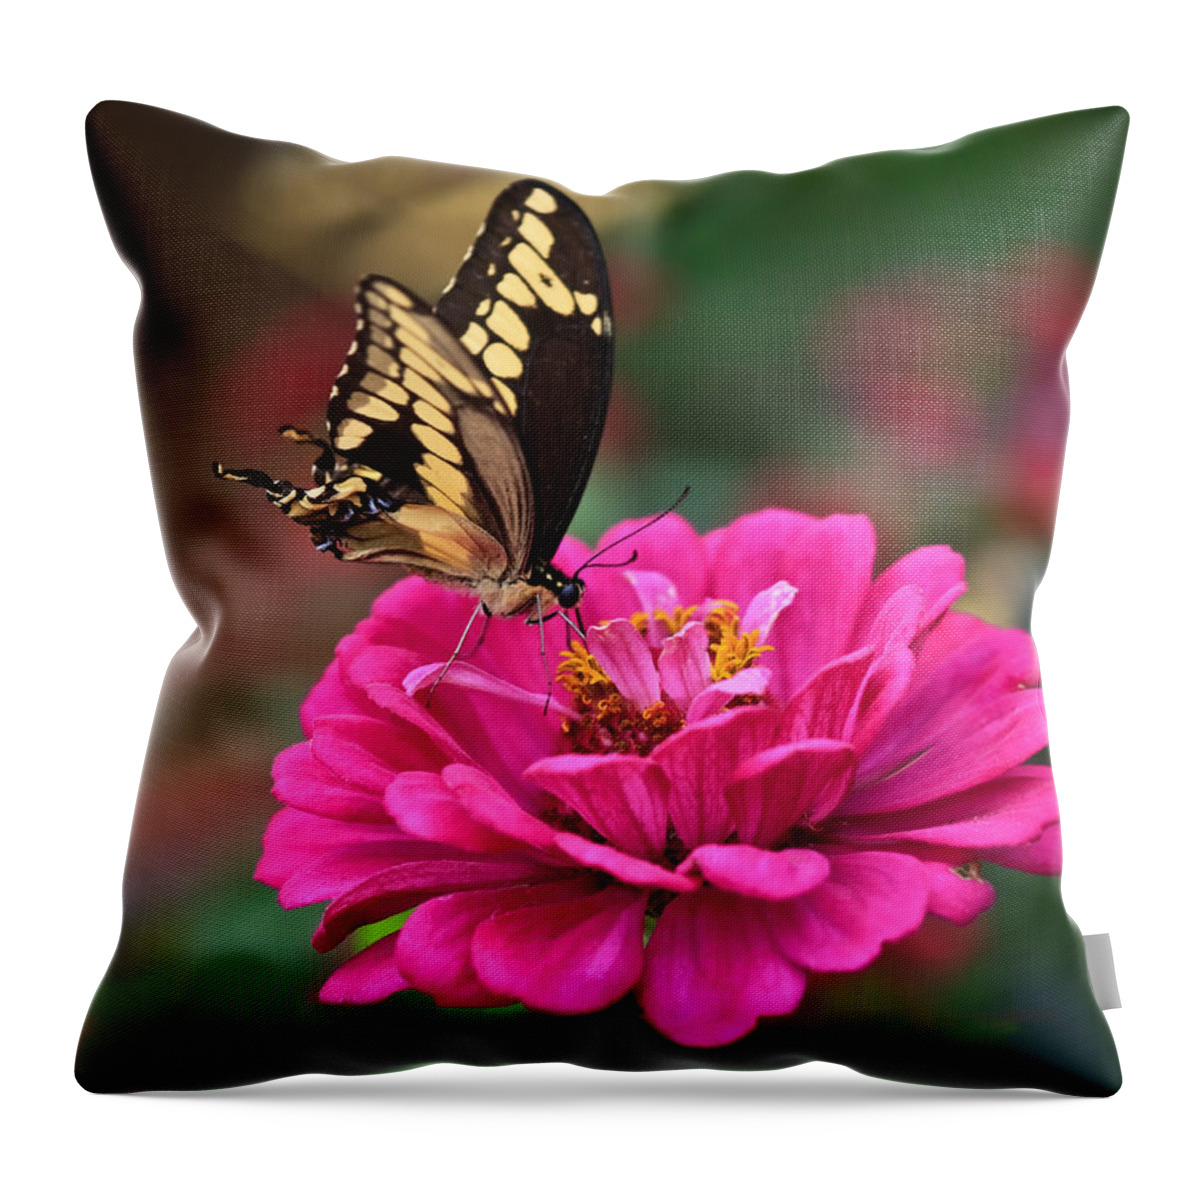 Swallowtail Throw Pillow featuring the photograph Swallowtail Butterfly by Beth Sargent